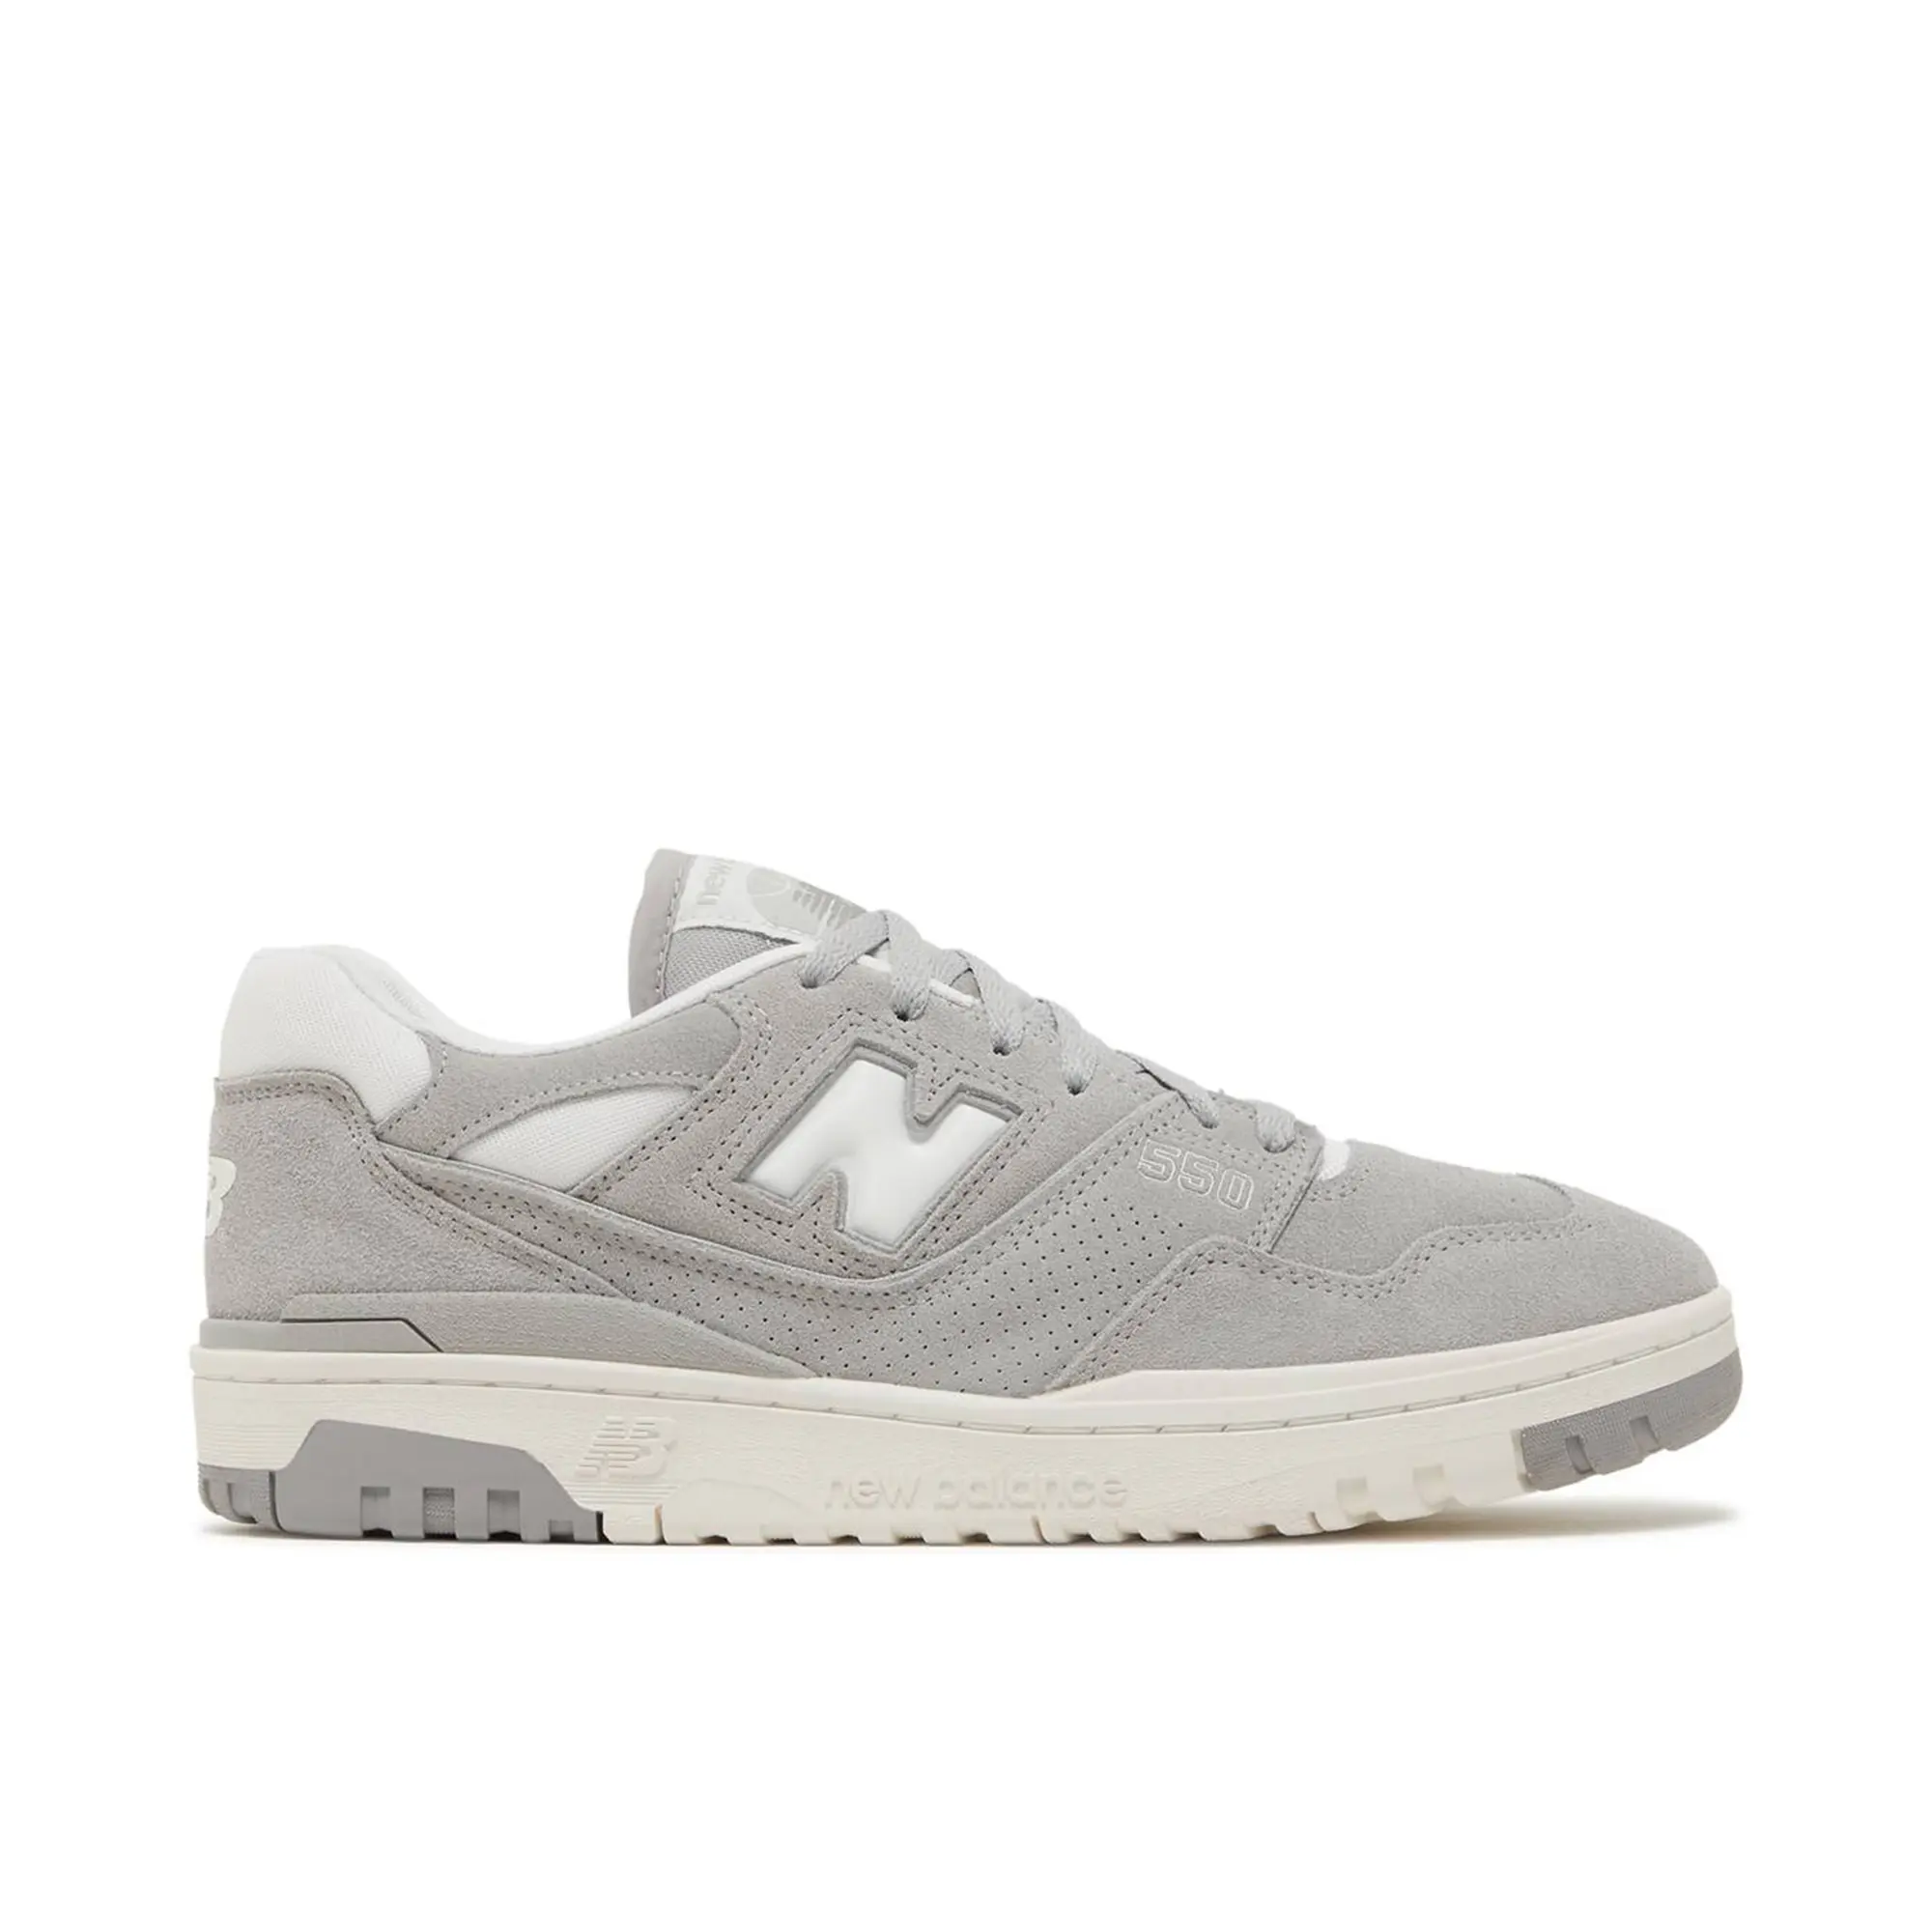 New Balance Men's 550 in Grey/White Leather